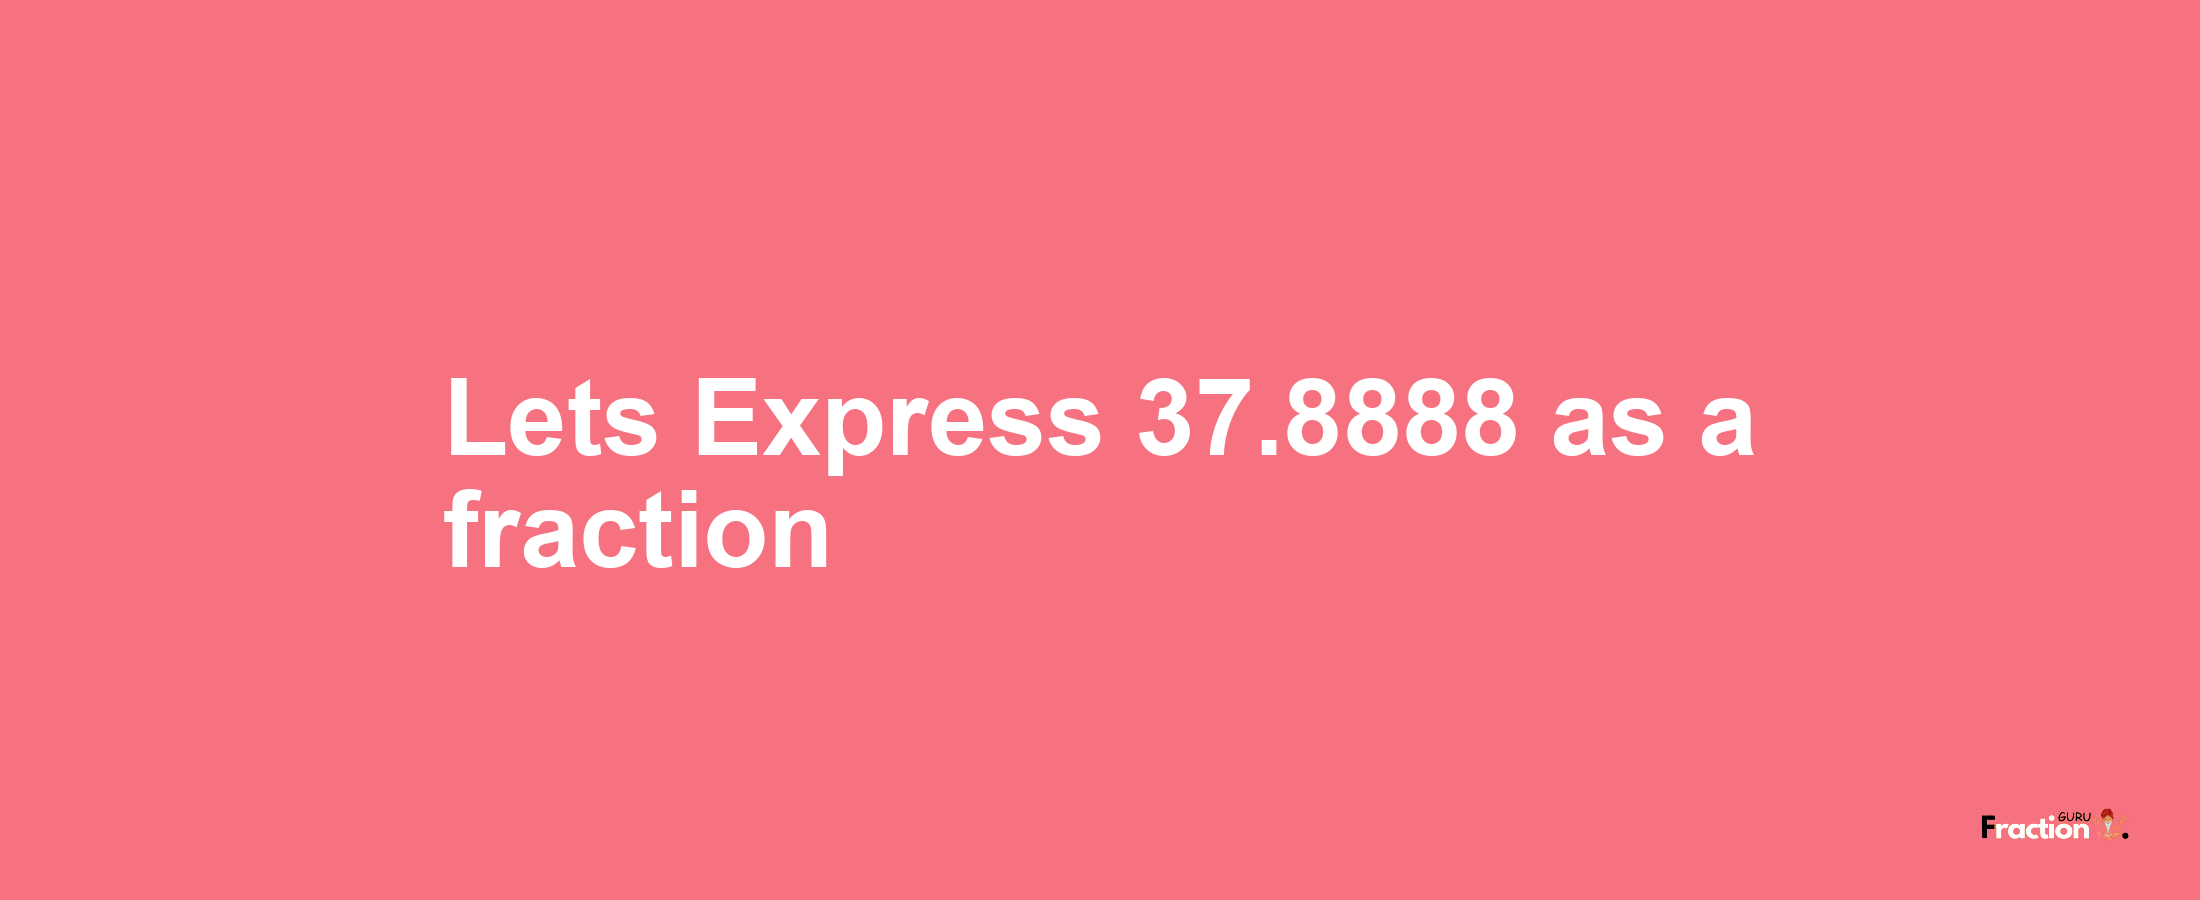 Lets Express 37.8888 as afraction